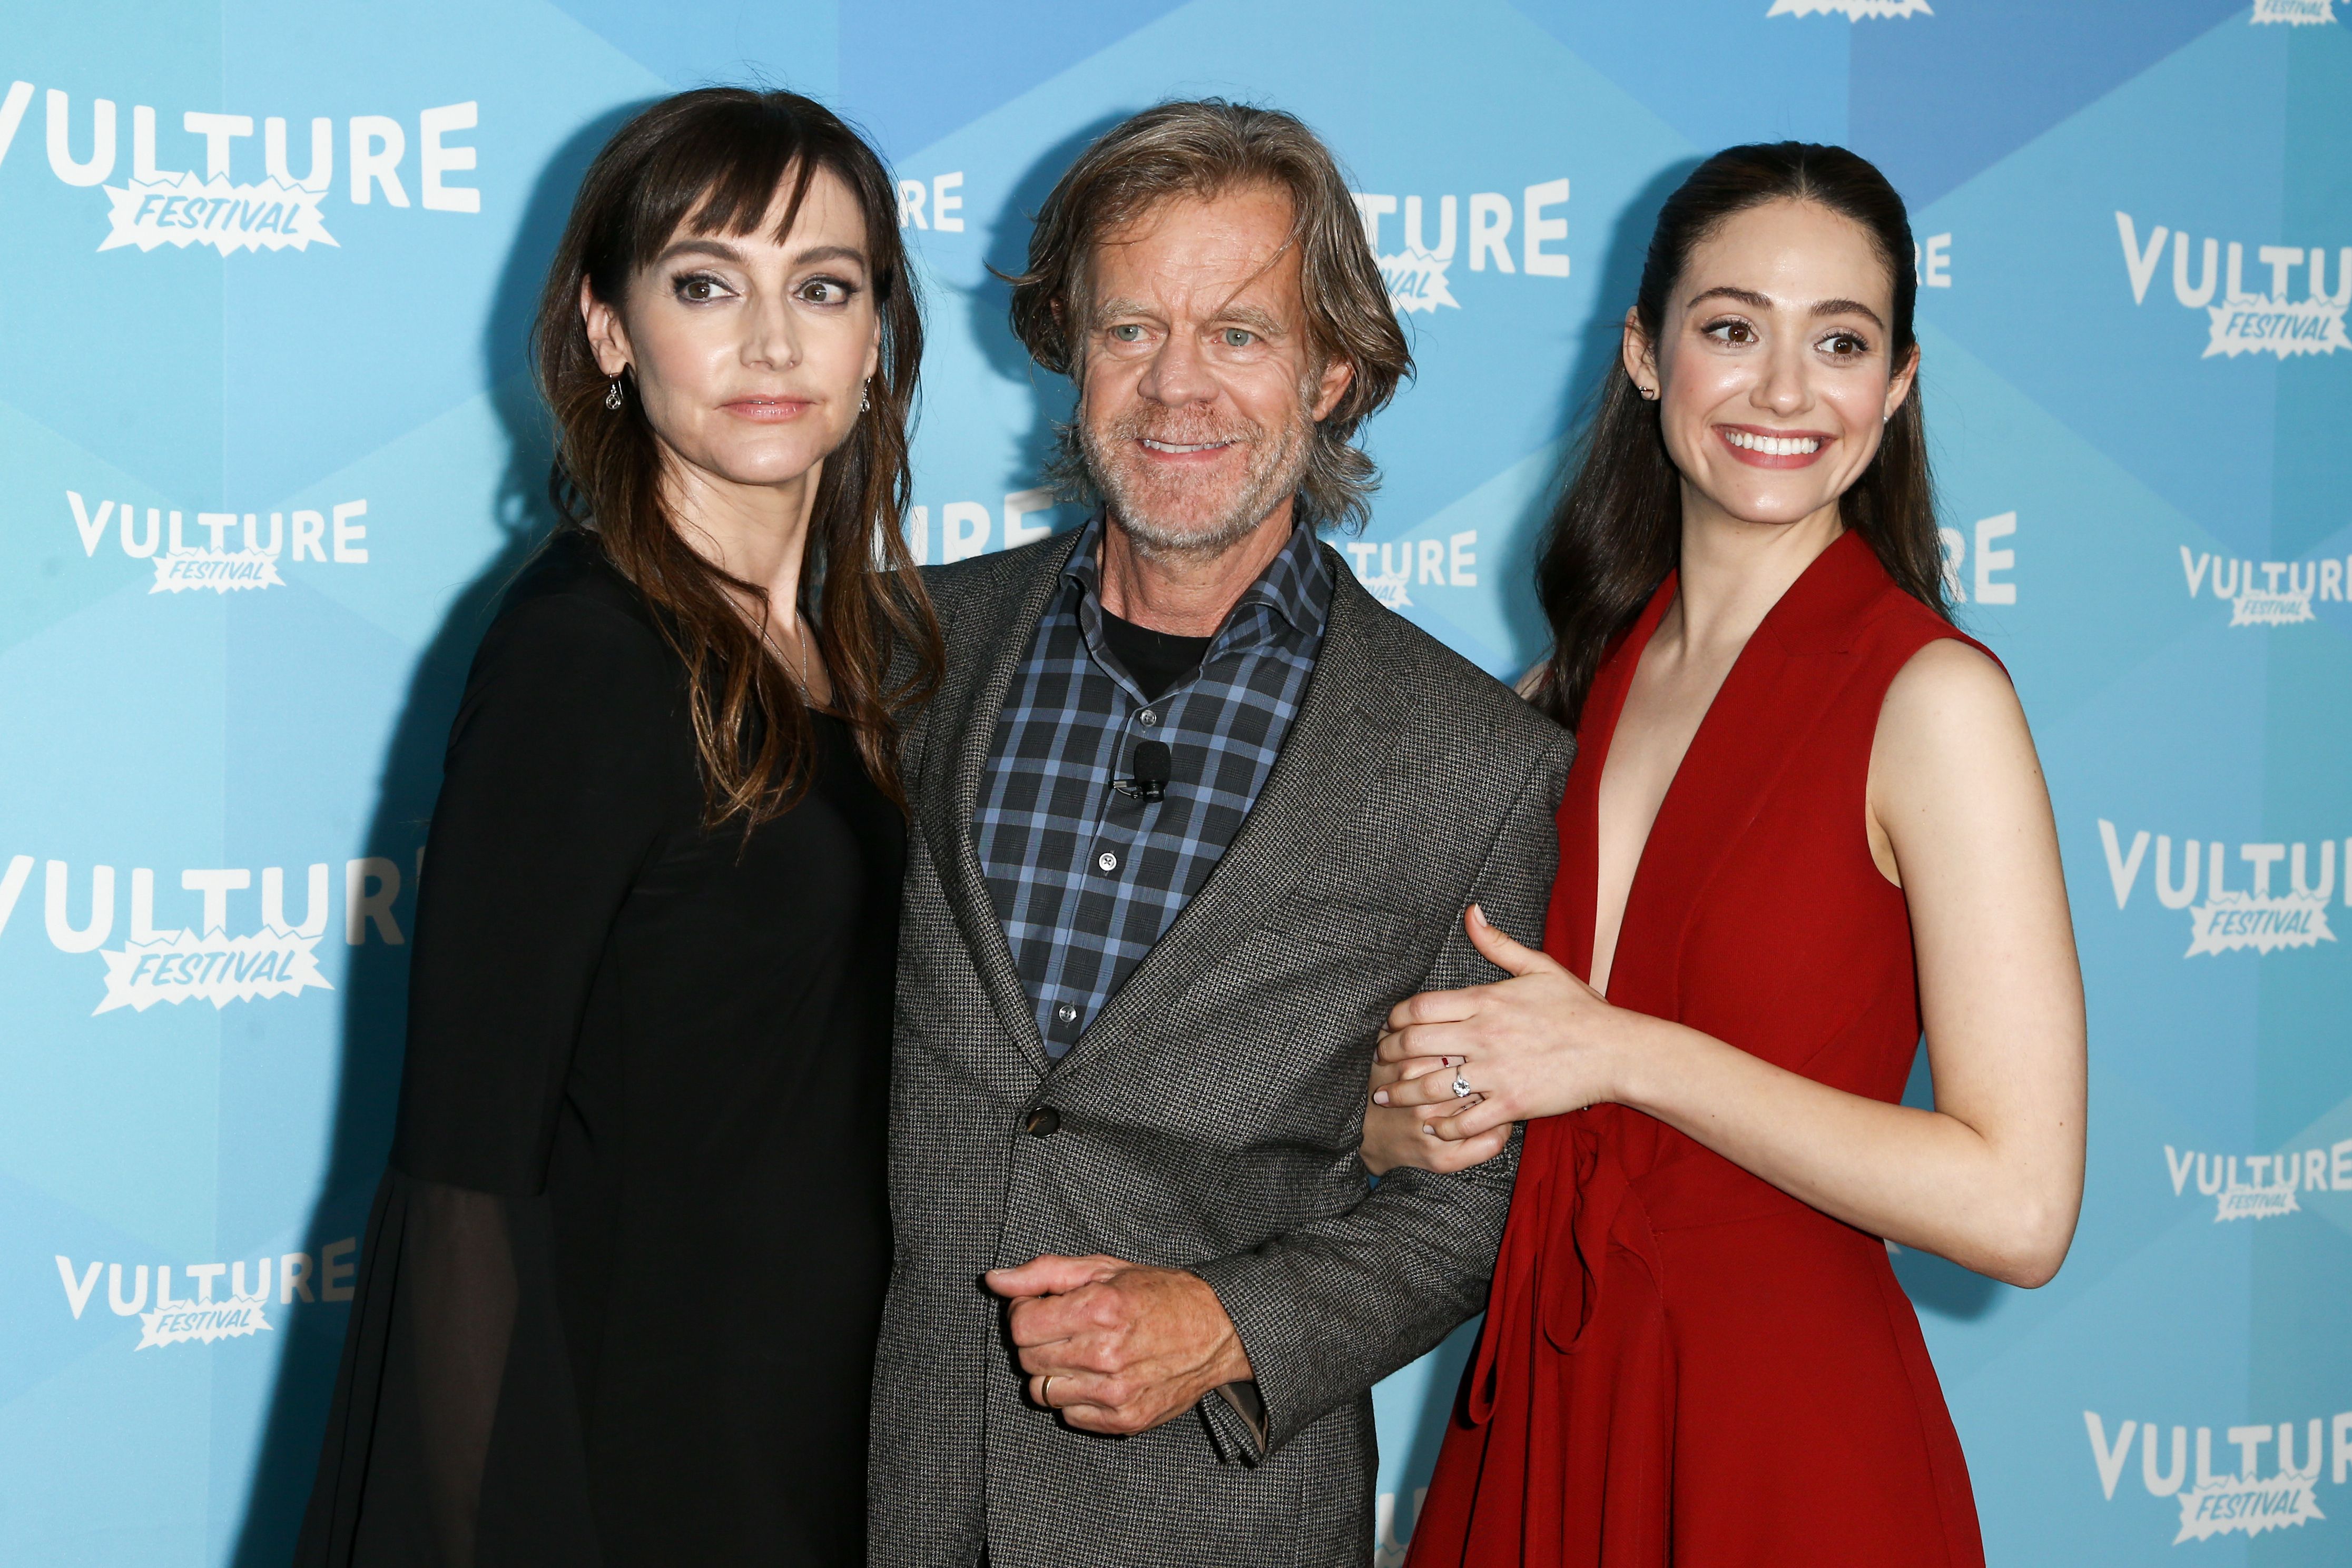 Wiliam H. Macy and Emmy Rossum stand side-by-side before a blue backdrop.